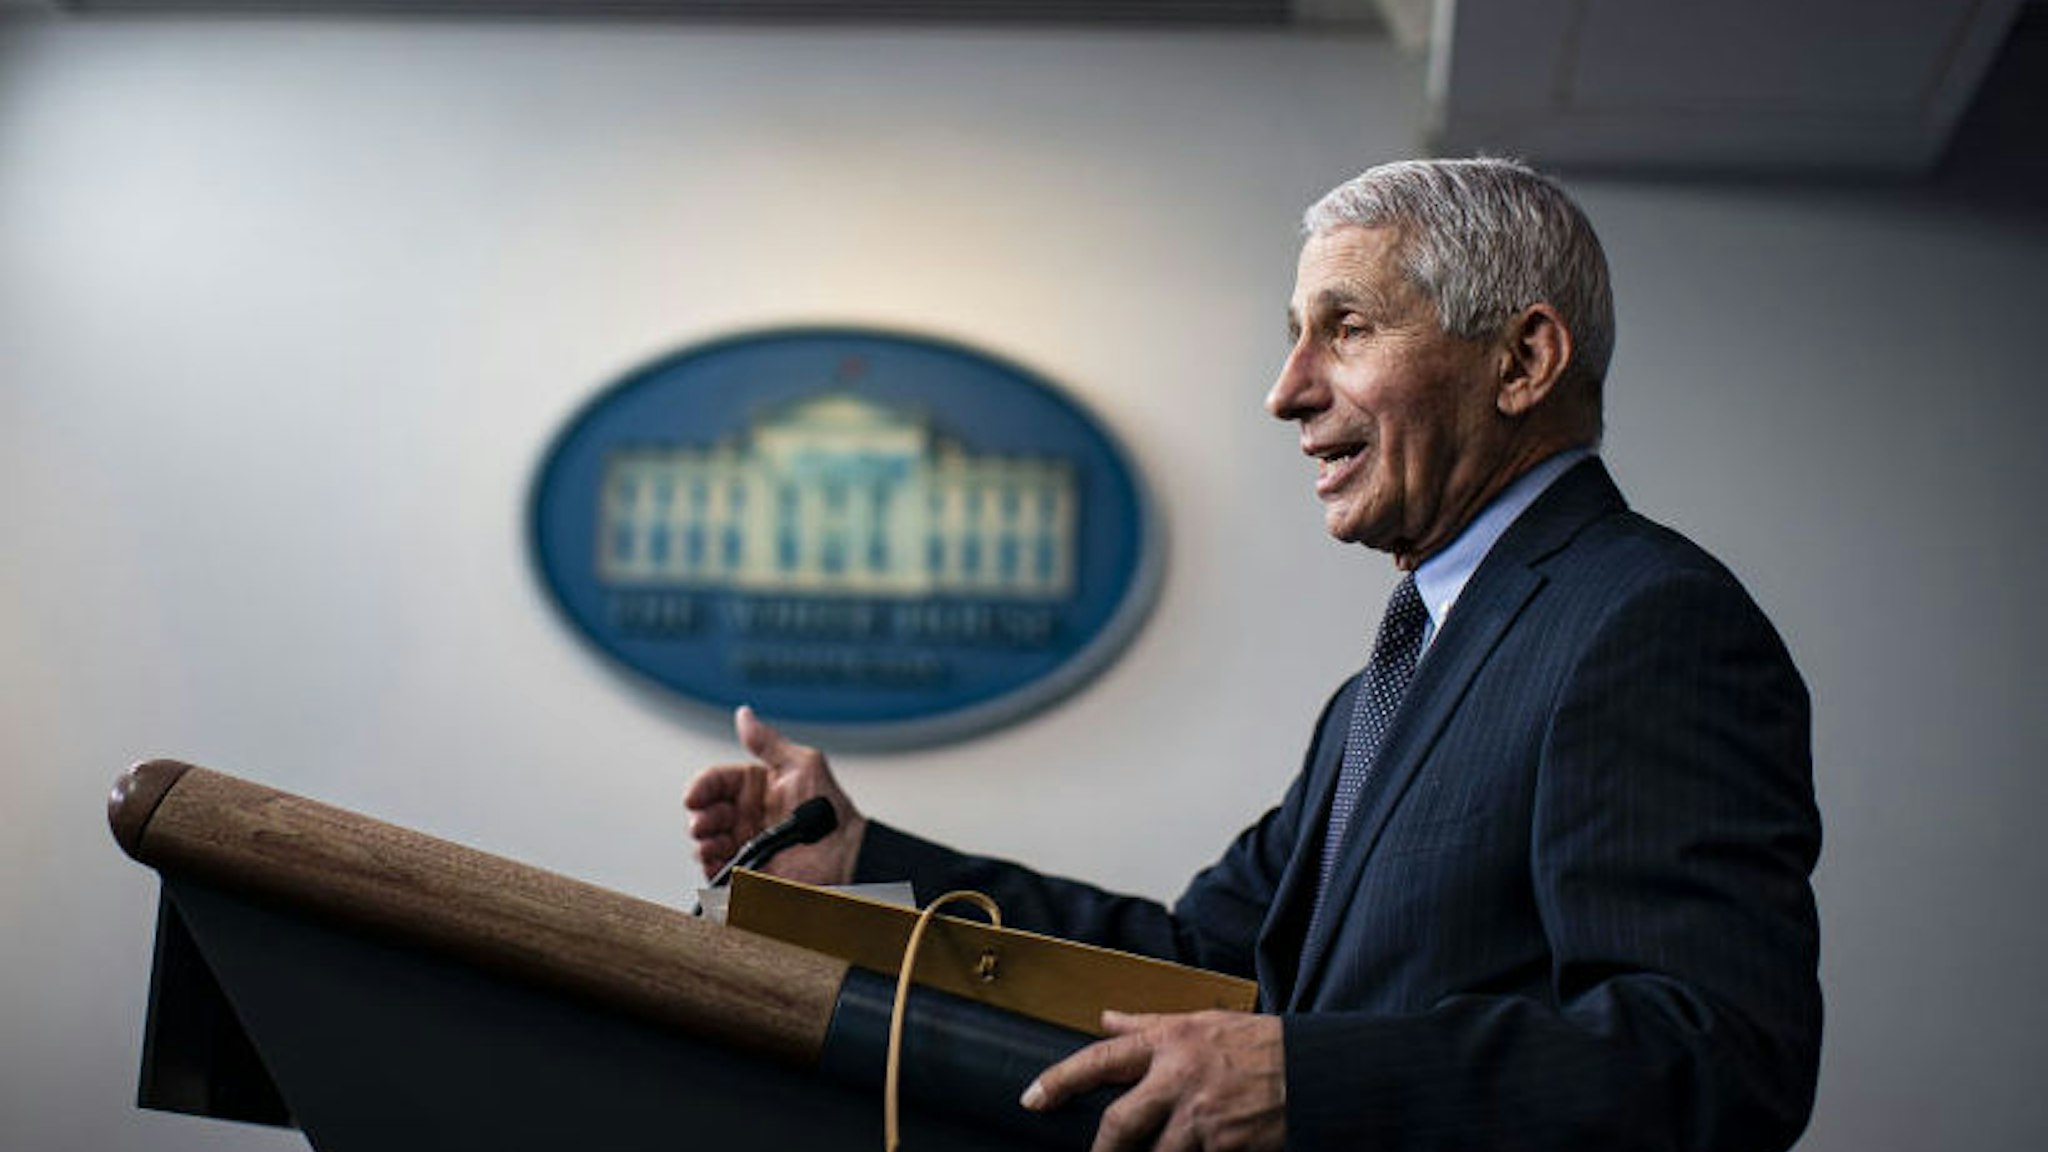 Anthony Fauci, director of the National Institute of Allergy and Infectious Diseases, speaks during a news conference in the James S. Brady Press Briefing Room at the White House in Washington, D.C., U.S., on Thursday, Jan. 21, 2021. Biden in his first full day in office plans to issue a sweeping set of executive orders to tackle the raging Covid-19 pandemic that will rapidly reverse or refashion many of his predecessor's most heavily criticized policies. Photographer: Al Drago/Bloomberg